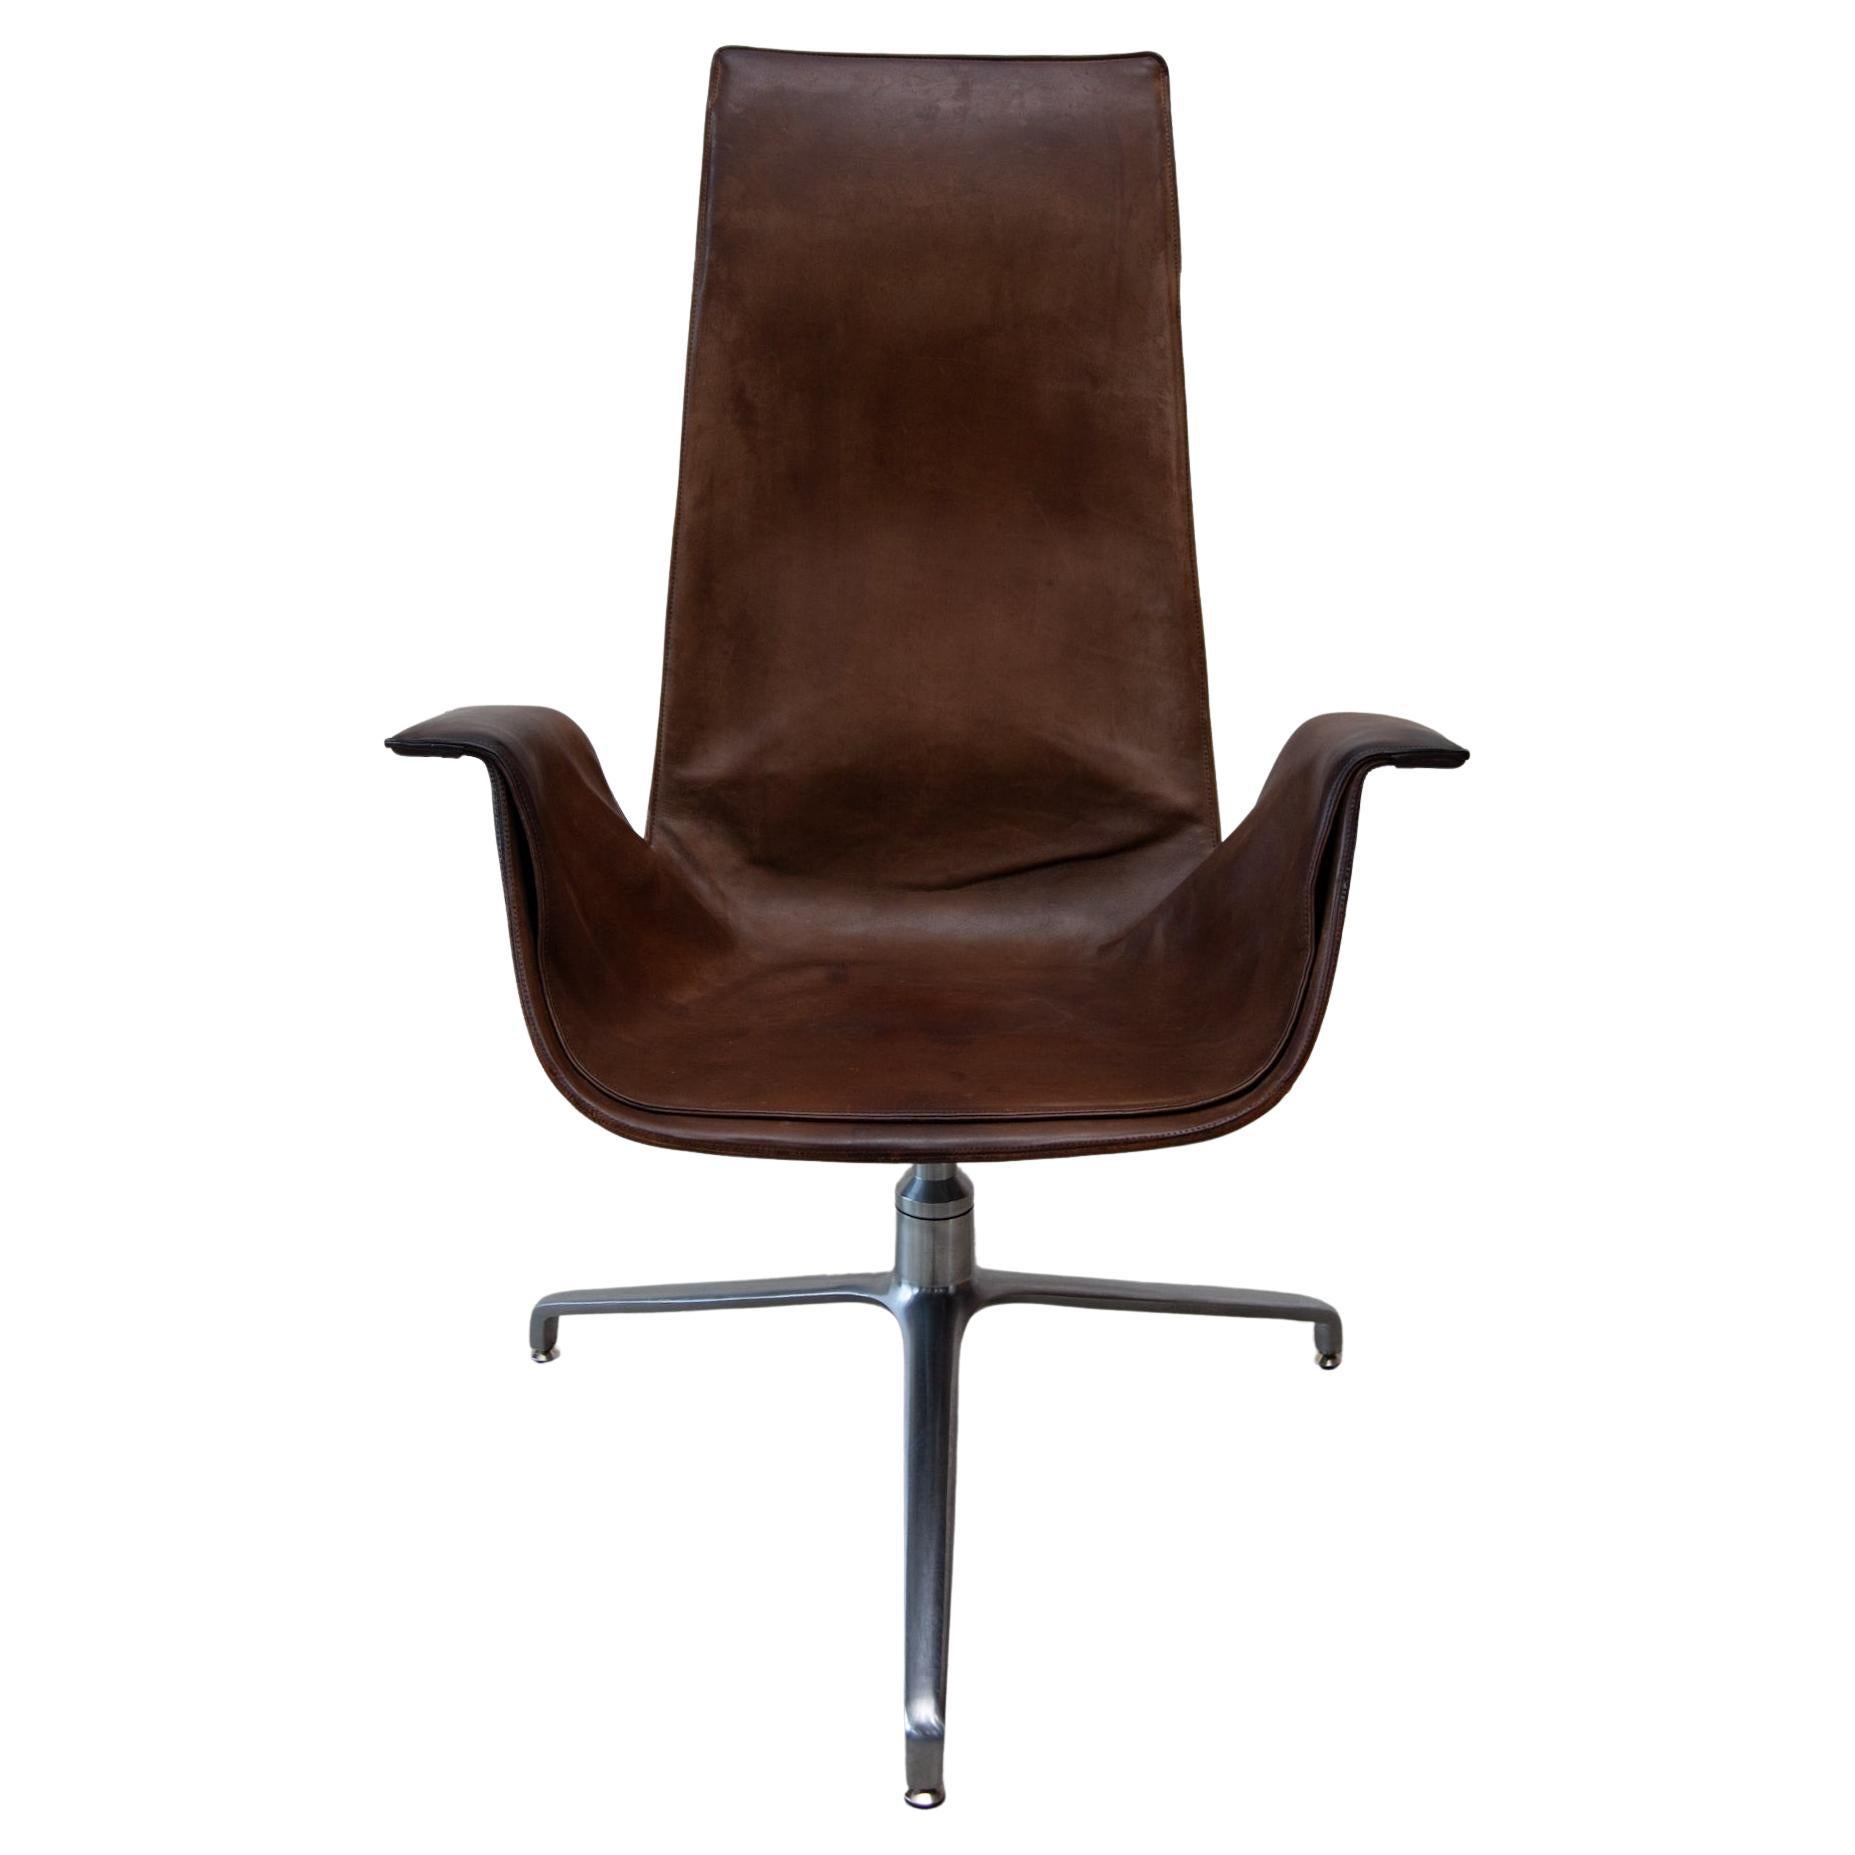 Fabricius & Kastholm FK6725 Desk, Lounge Chair in Brown Leather, Kill For Sale